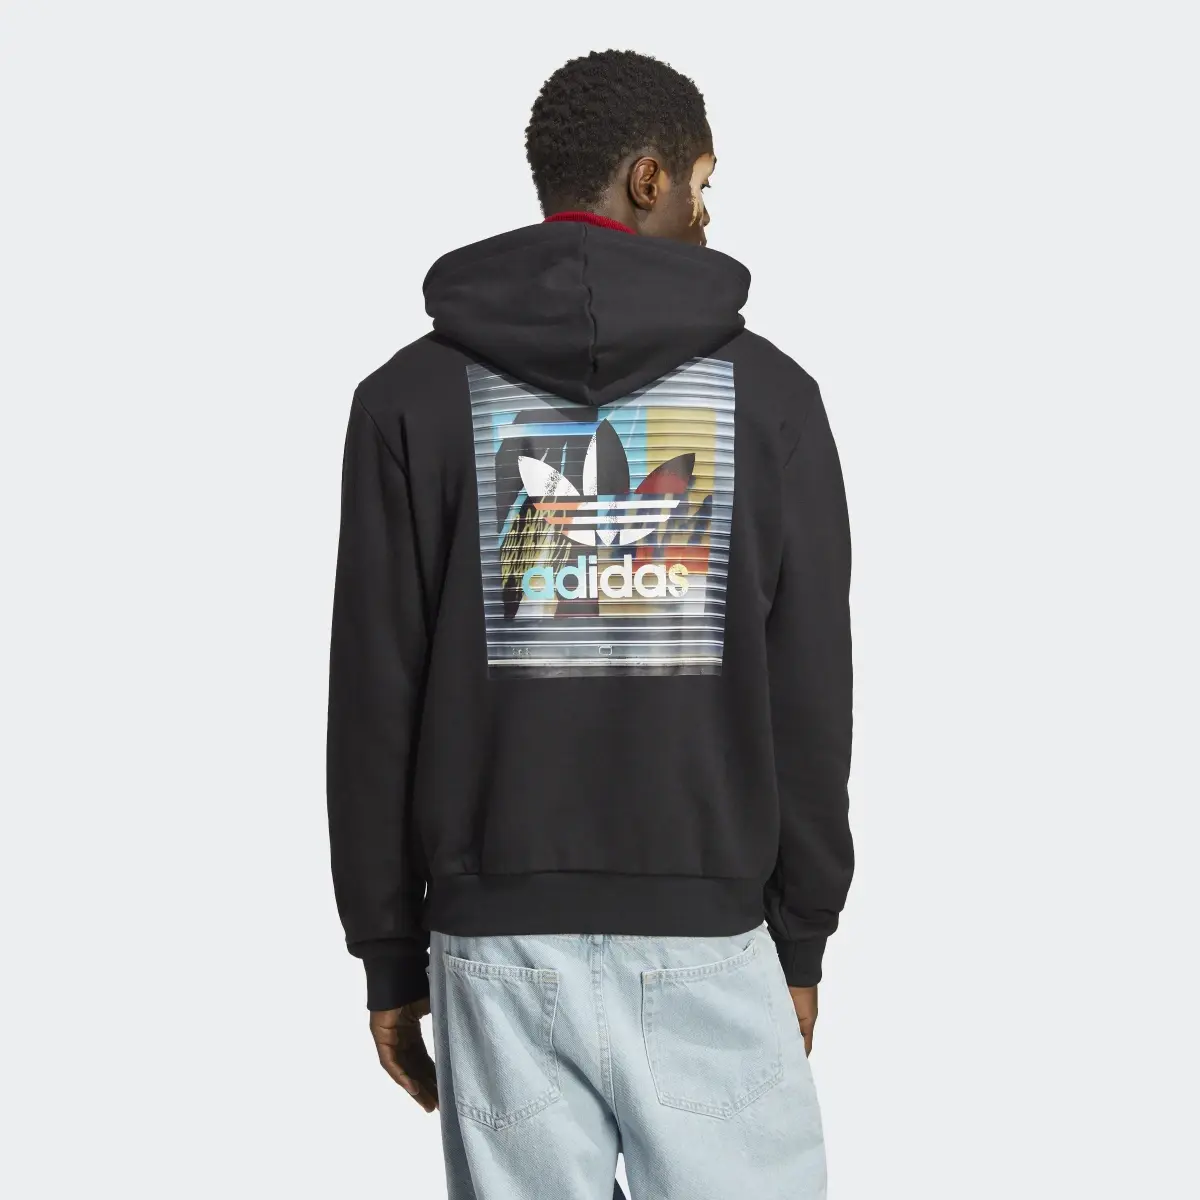 Adidas Hoodie Graphics off the Grid. 3